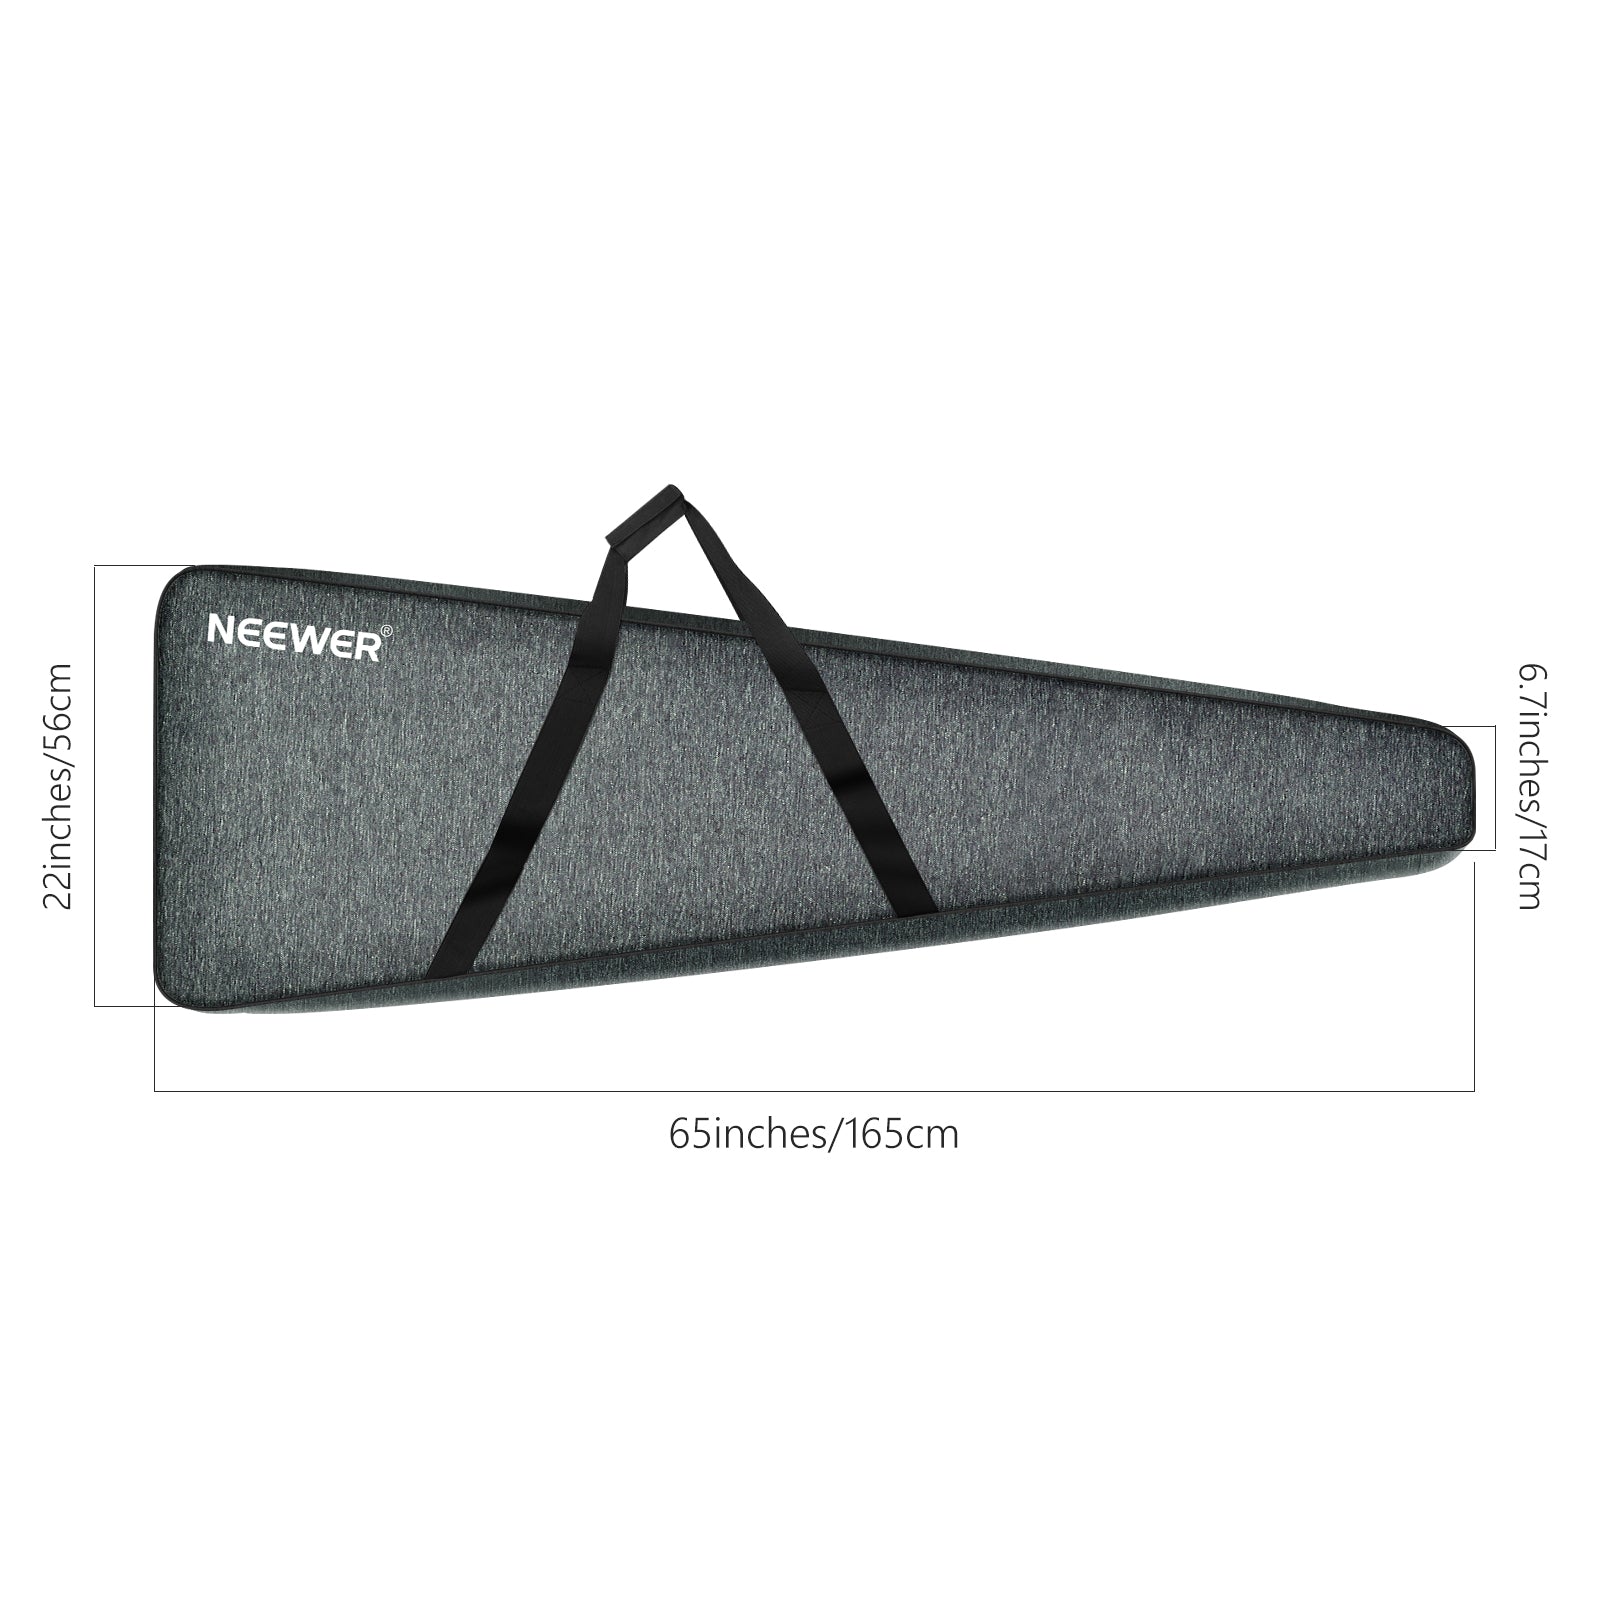 Neewer C-Stand Bag, 65”×22”×3.9”/165×56×10cm Heavy-Duty Carrying Case